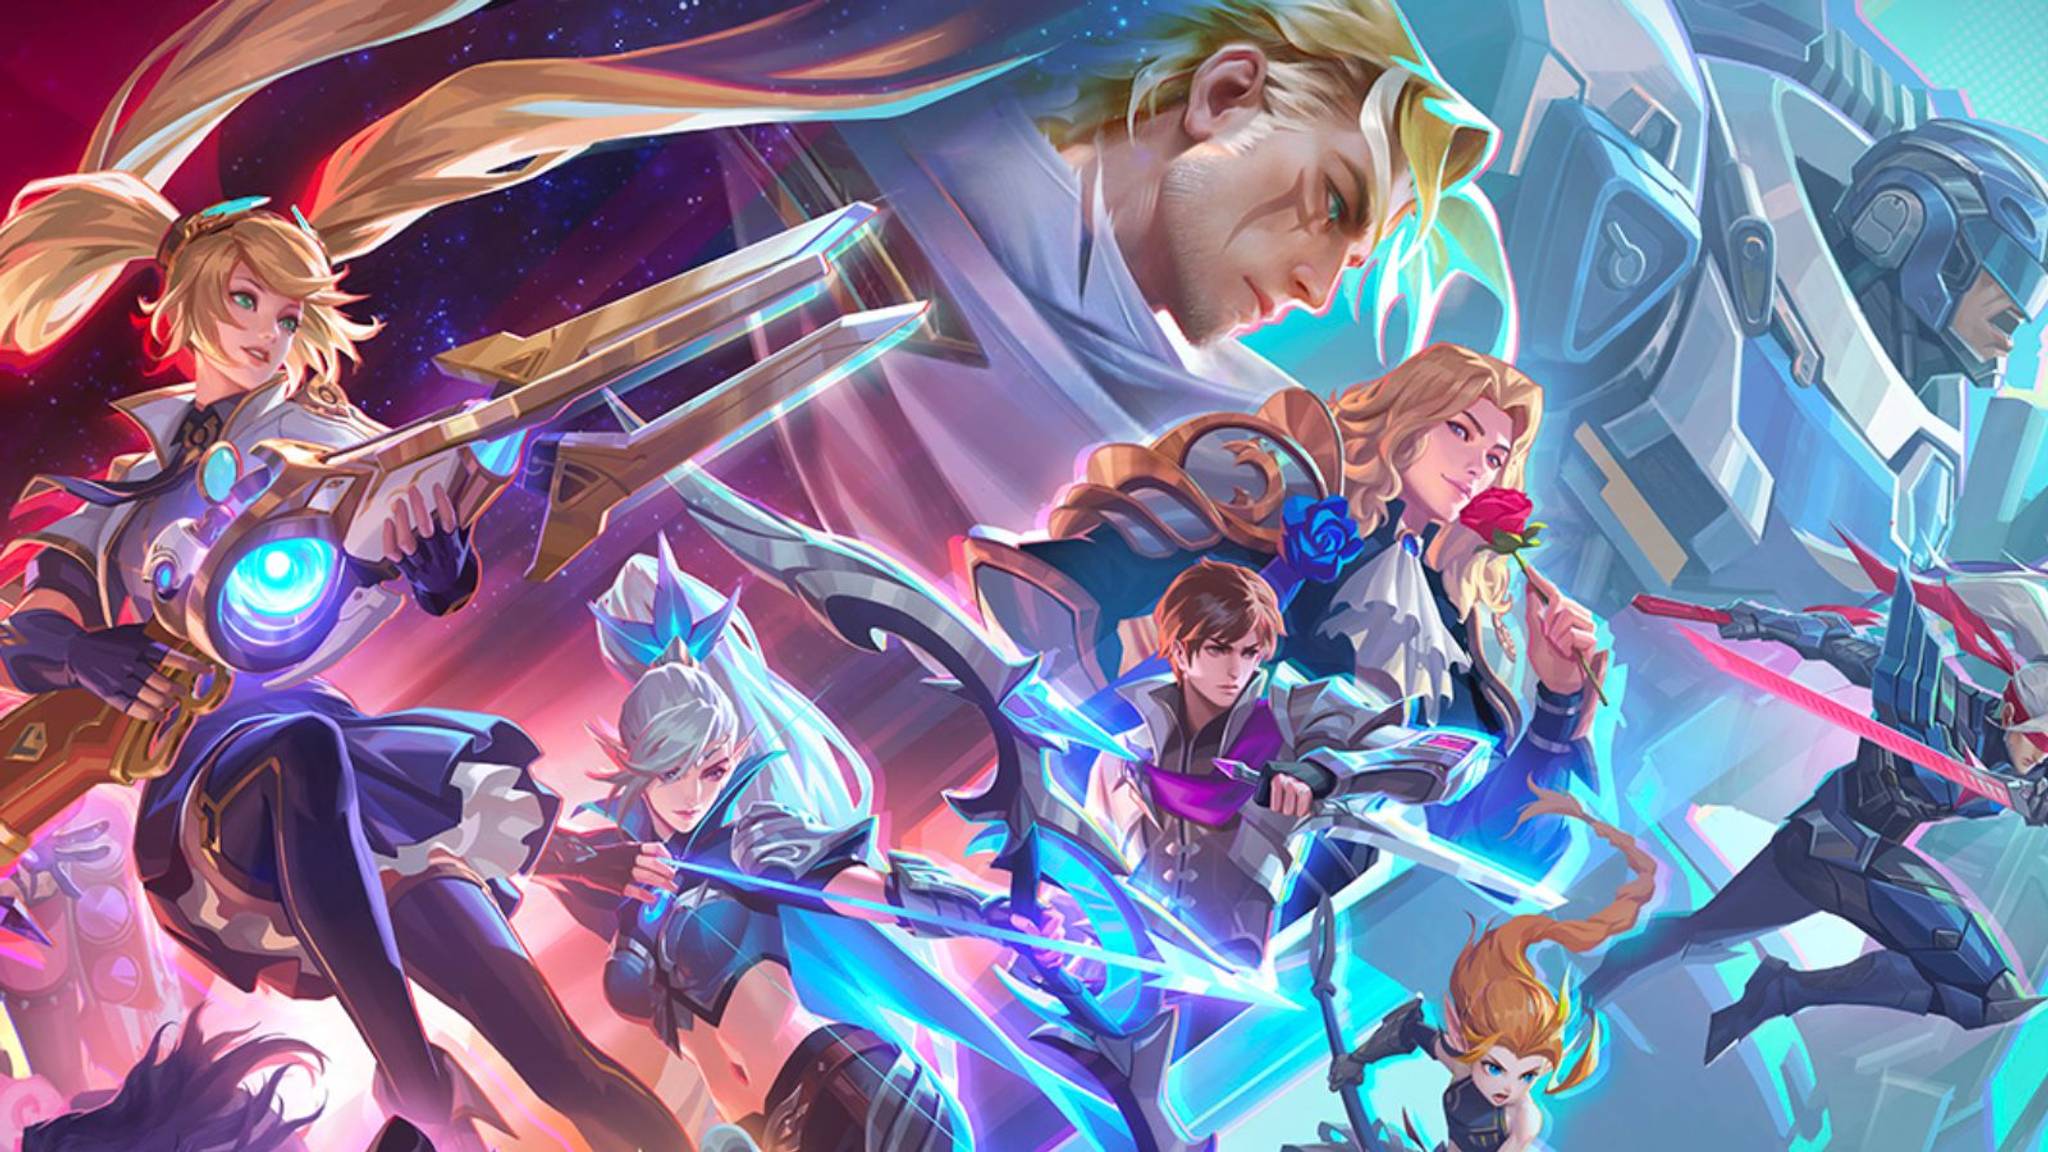 How Mobile Legends revamps gaming with rewarded content